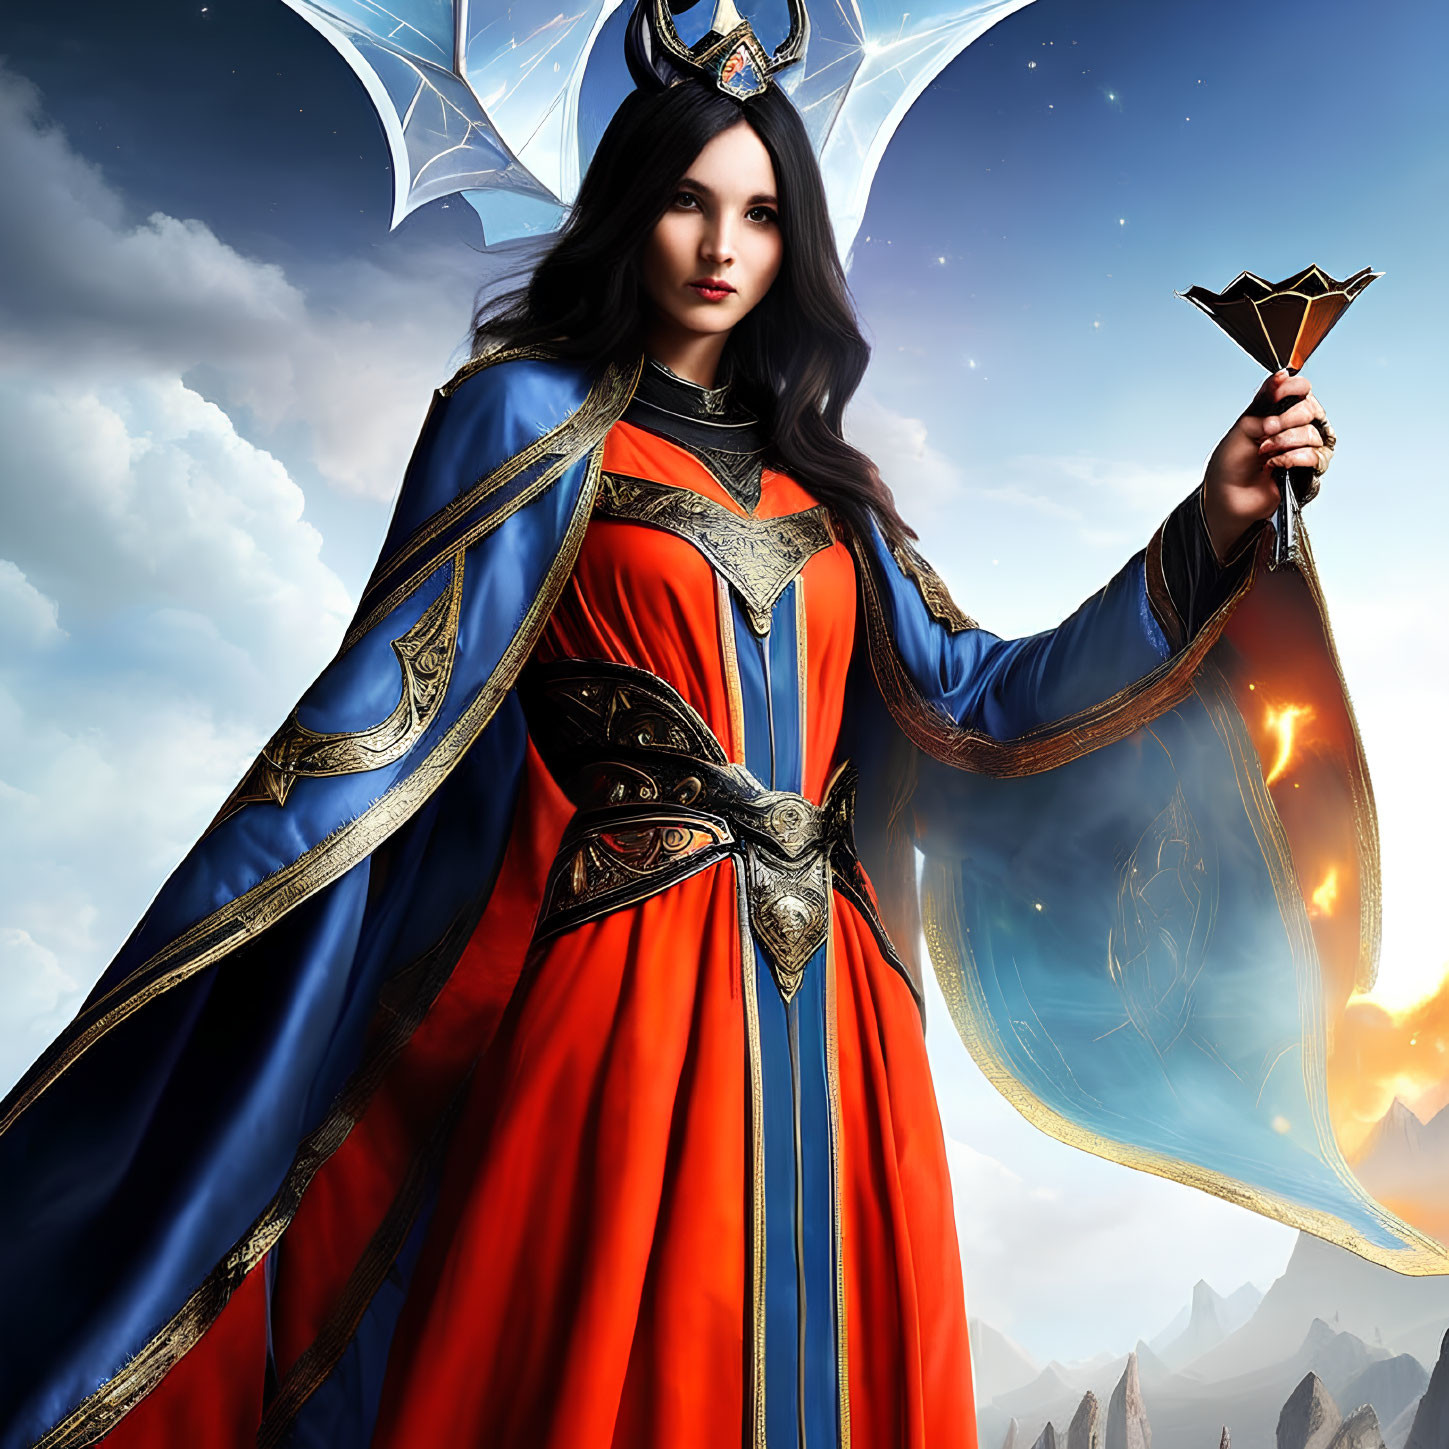 Majestic female figure in blue and red robe with golden staff against dramatic sky